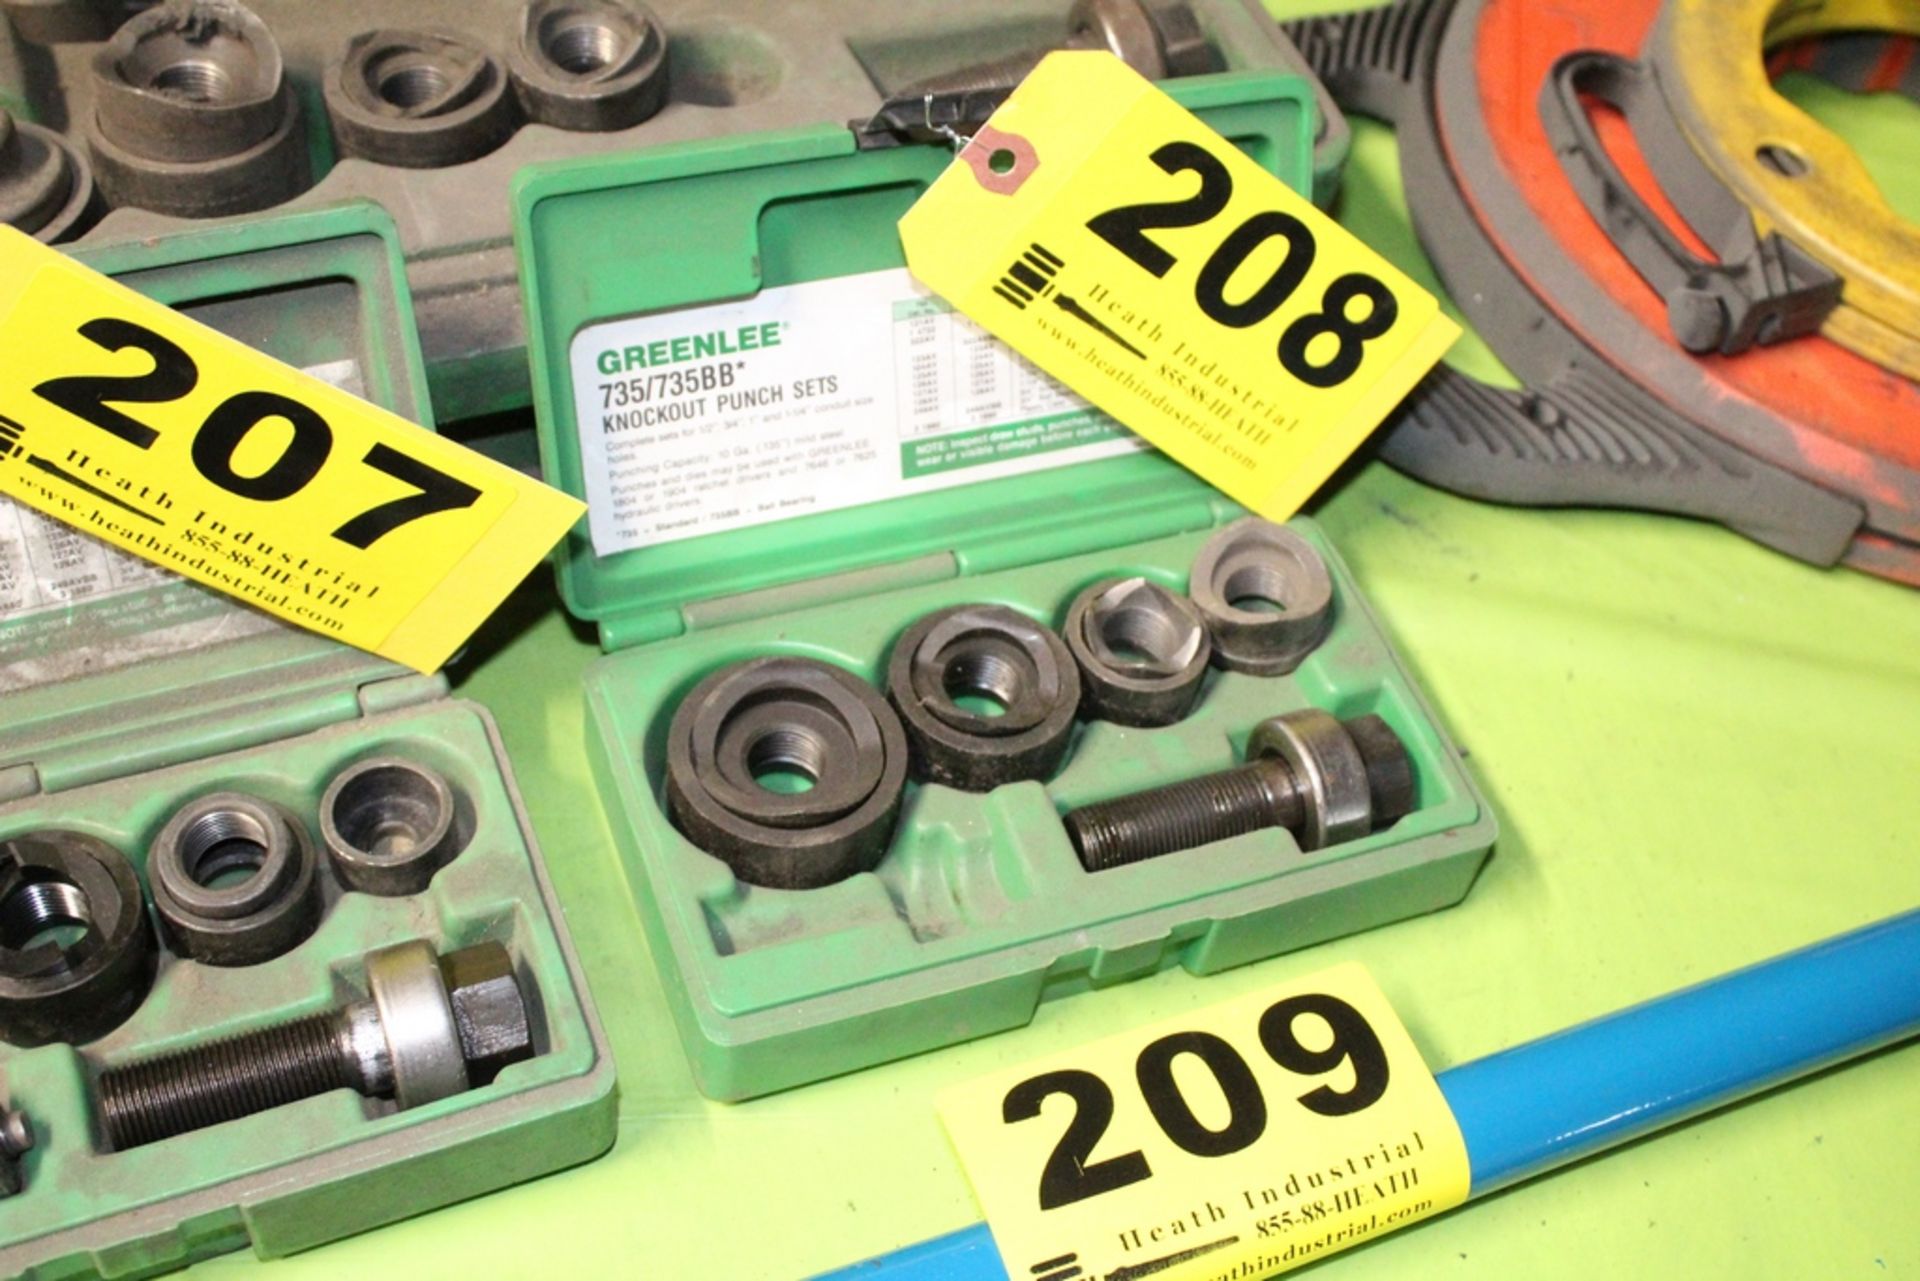 GREENLEE 735 KNOCKOUT PUNCH SET IN CASE